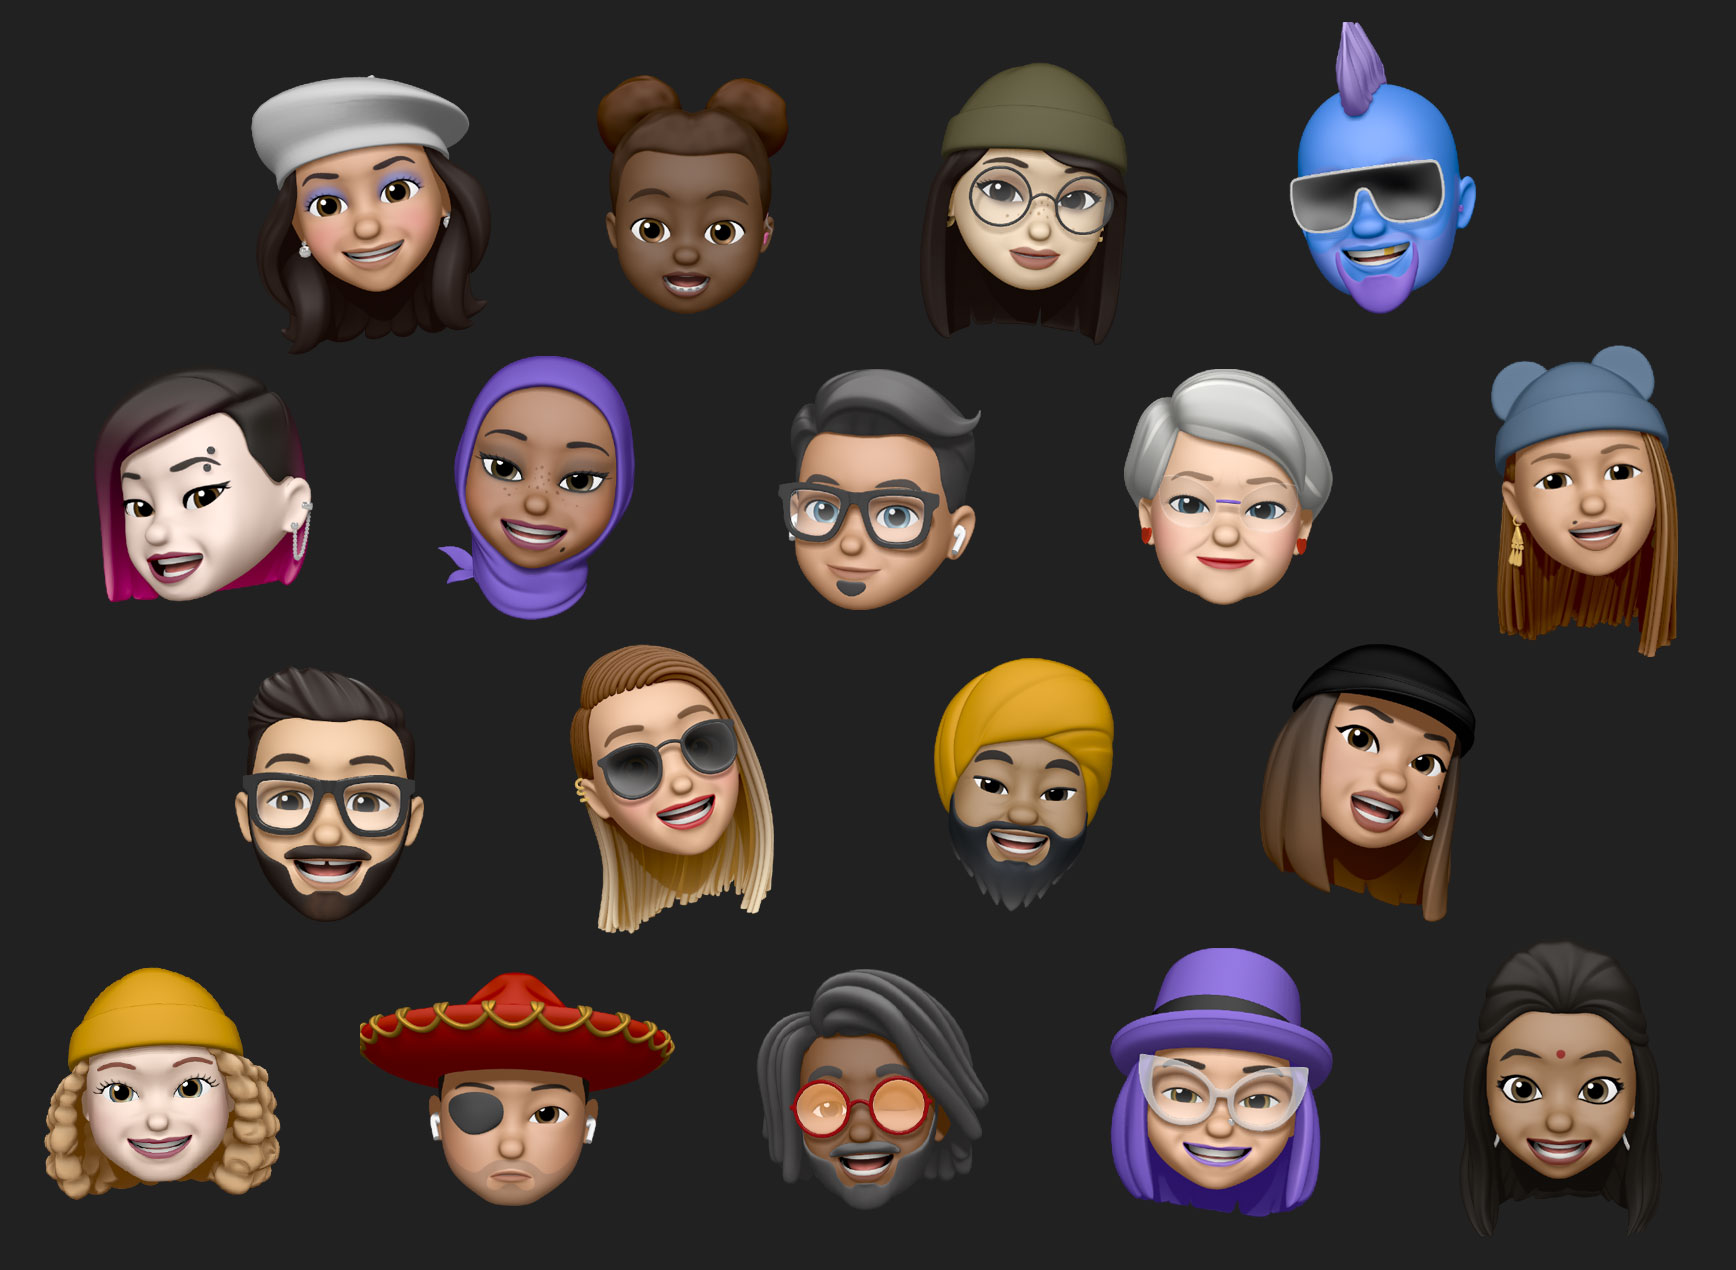 Apple adds new Memoji features and improves Messages in iOS 13